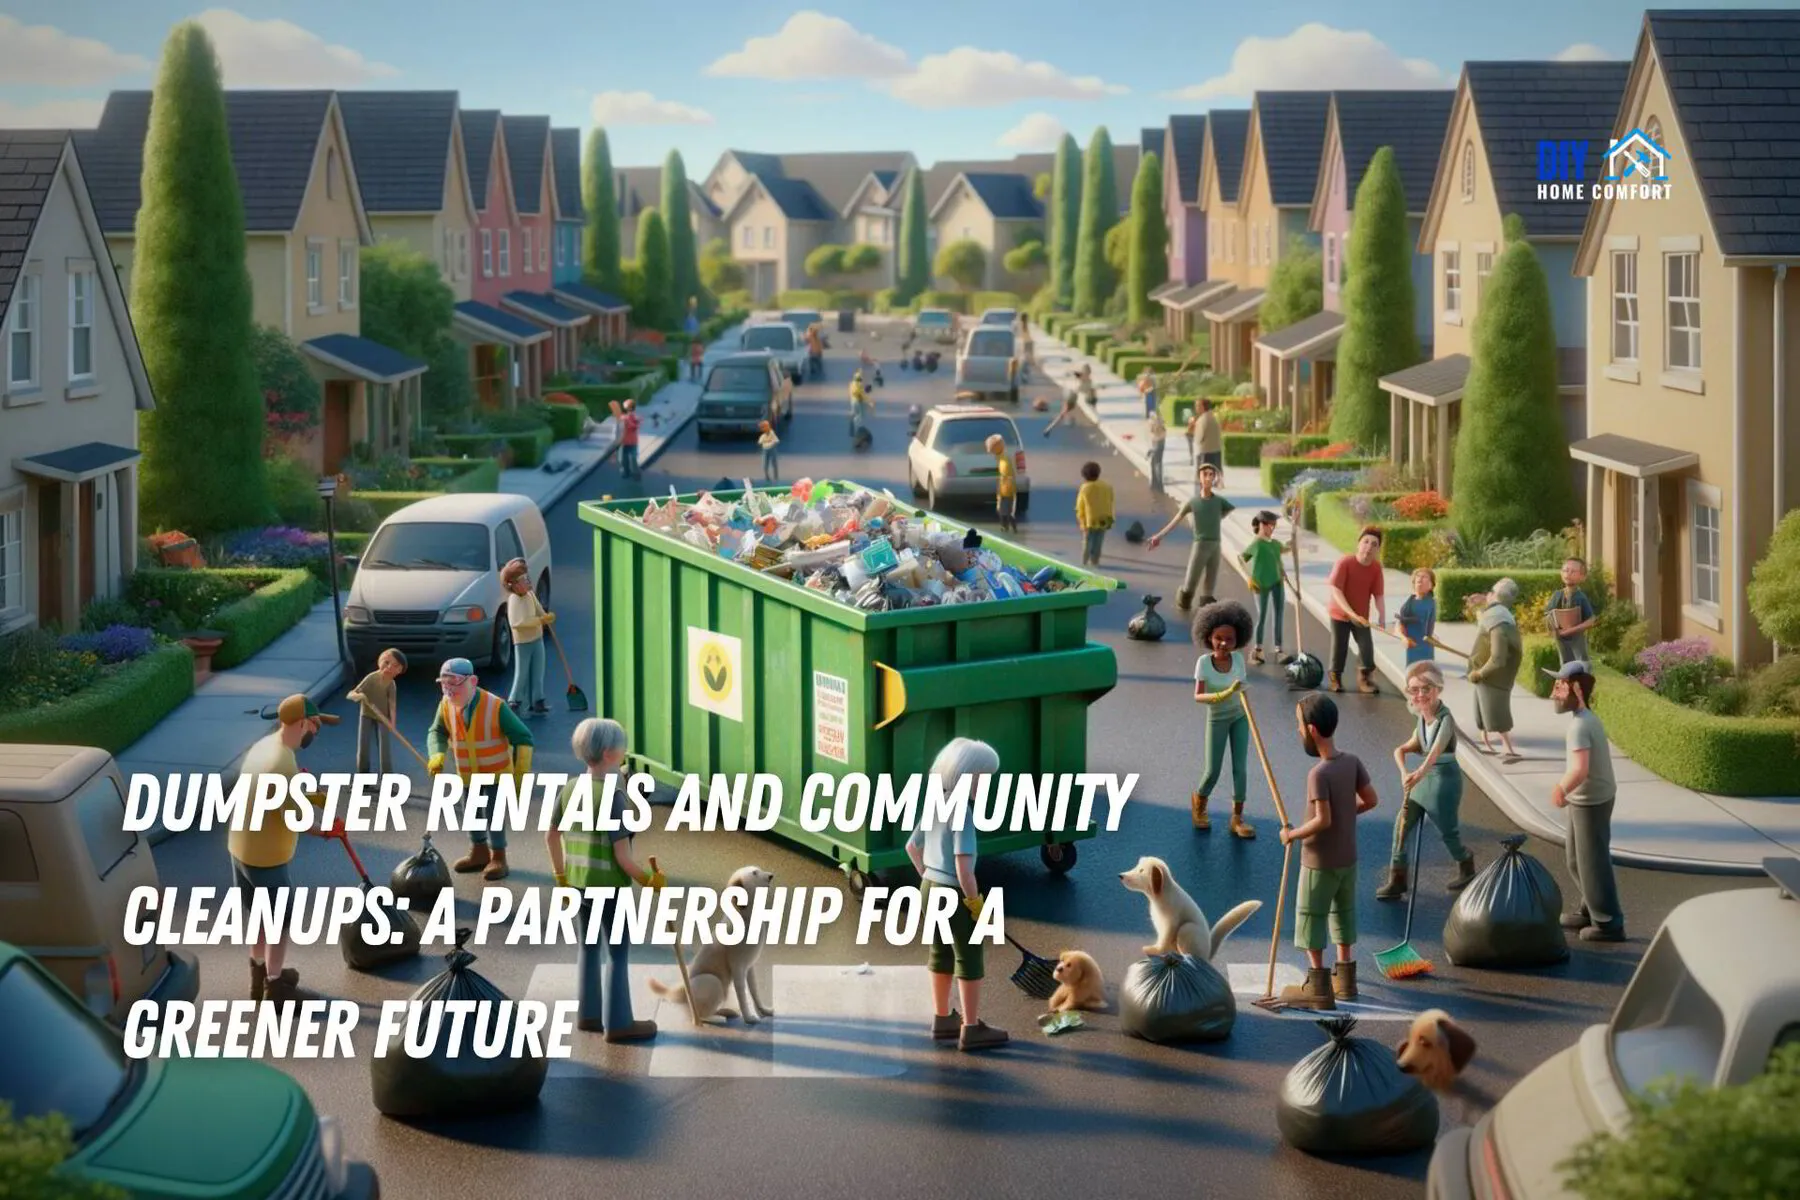 Dumpster Rentals and Community Cleanups: A Partnership for a Greener Future | DIY Home Comfort